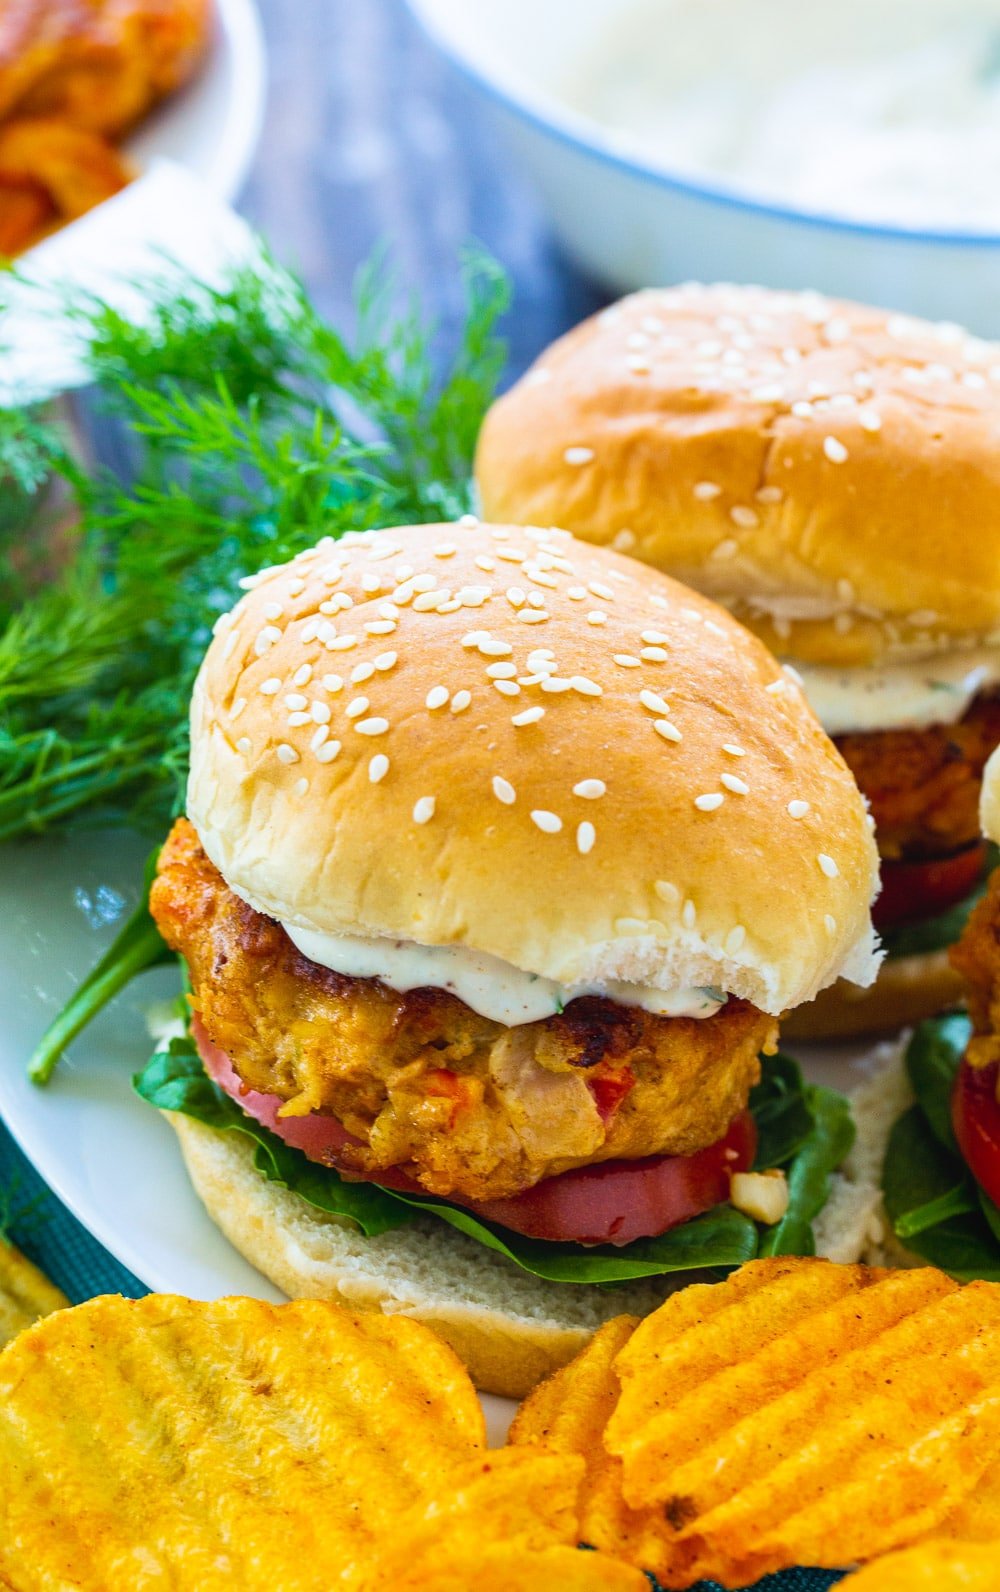 Burgers made with crawfish on a plate.